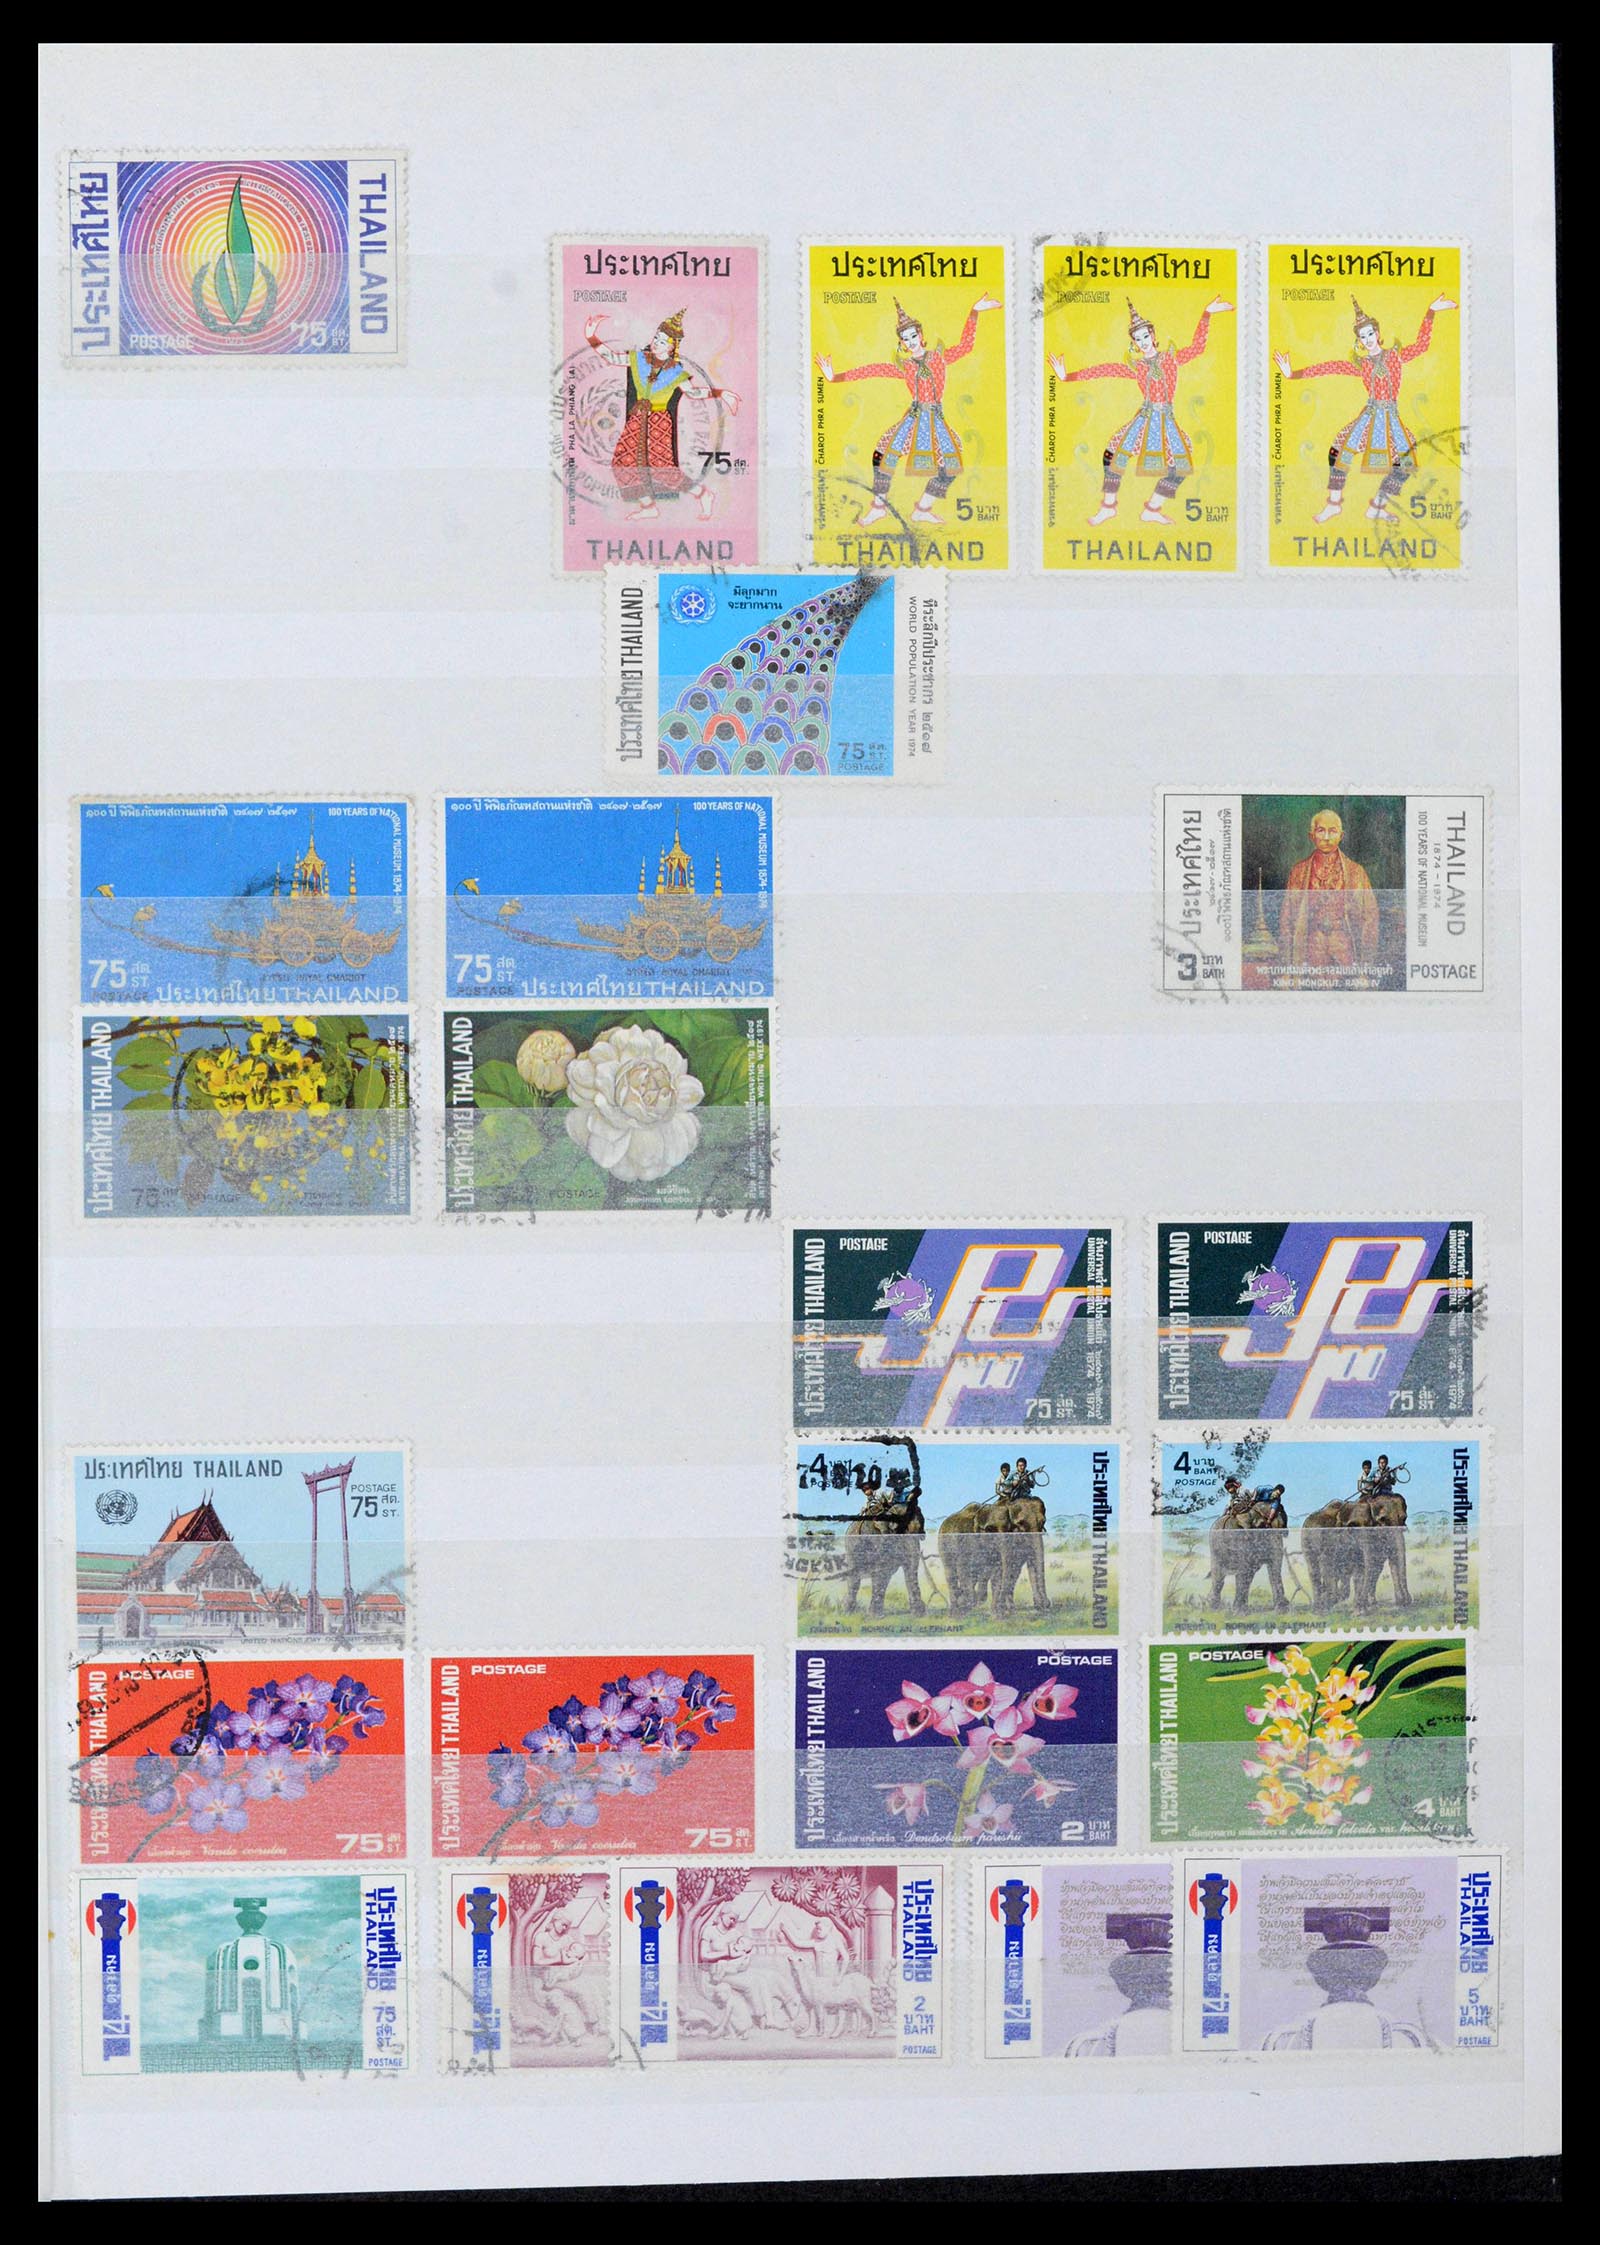 39384 0037 - Stamp collection 39384 Thailand 1883-2014.